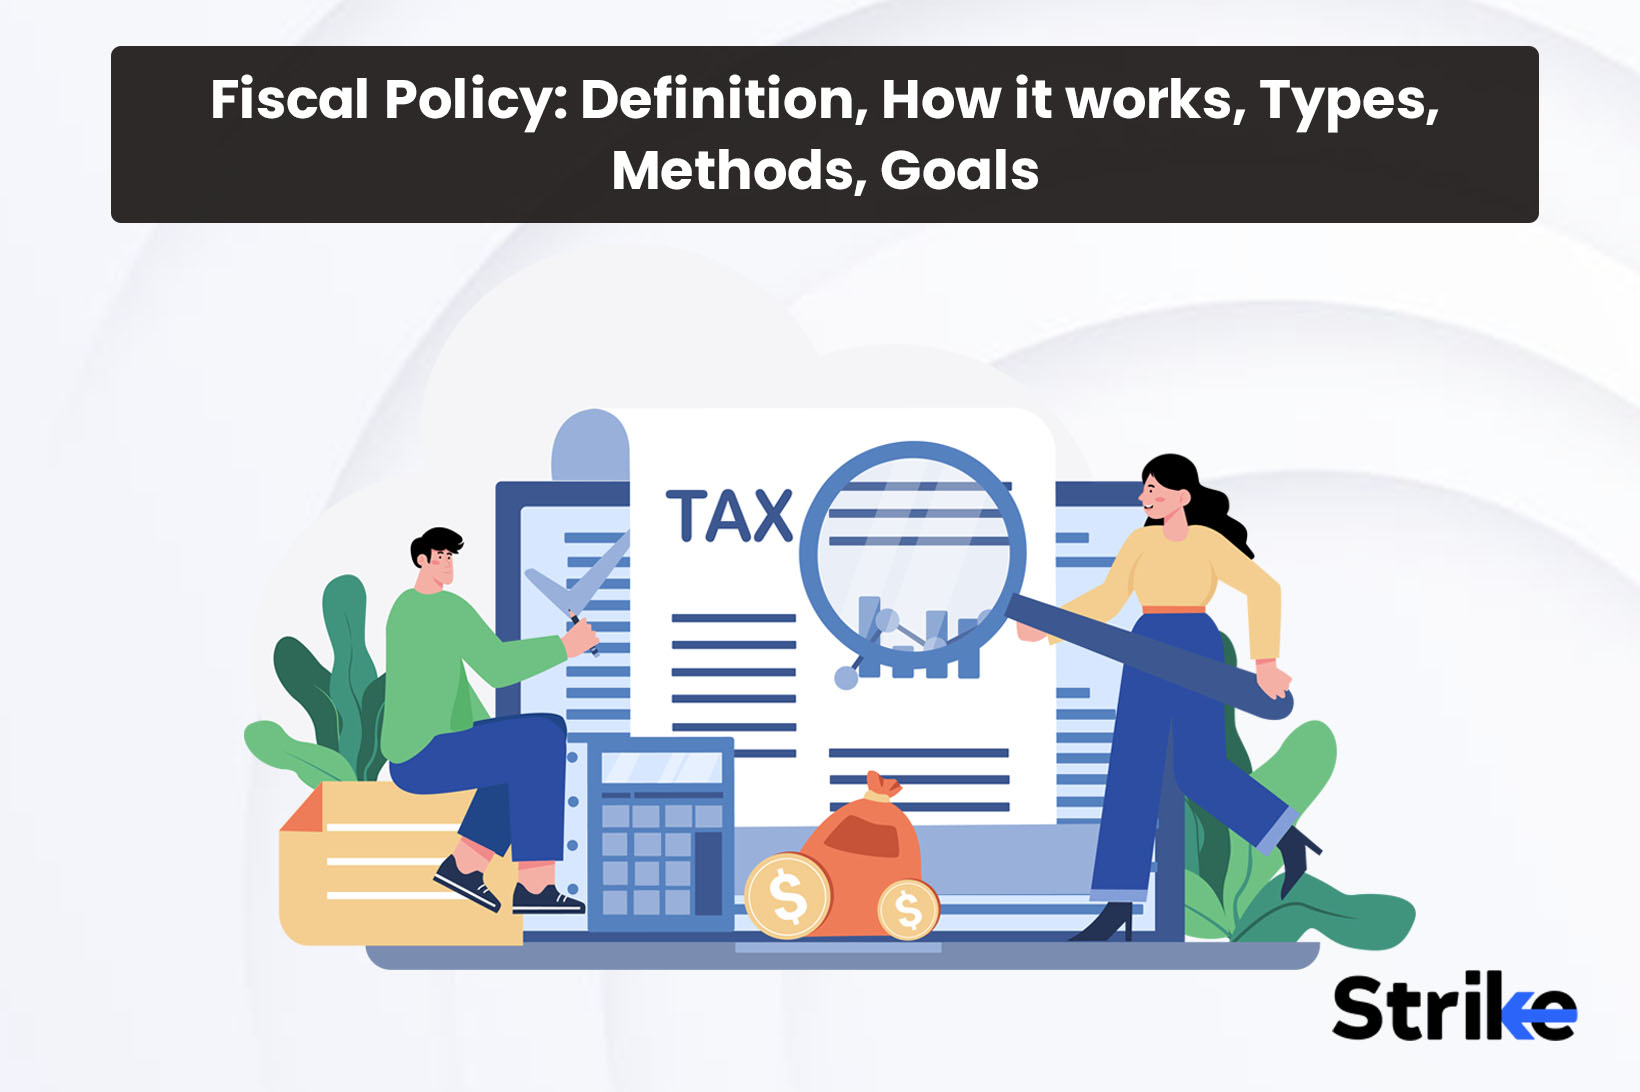 Fiscal Policy: Definition, How it works, Types, Methods, Goals